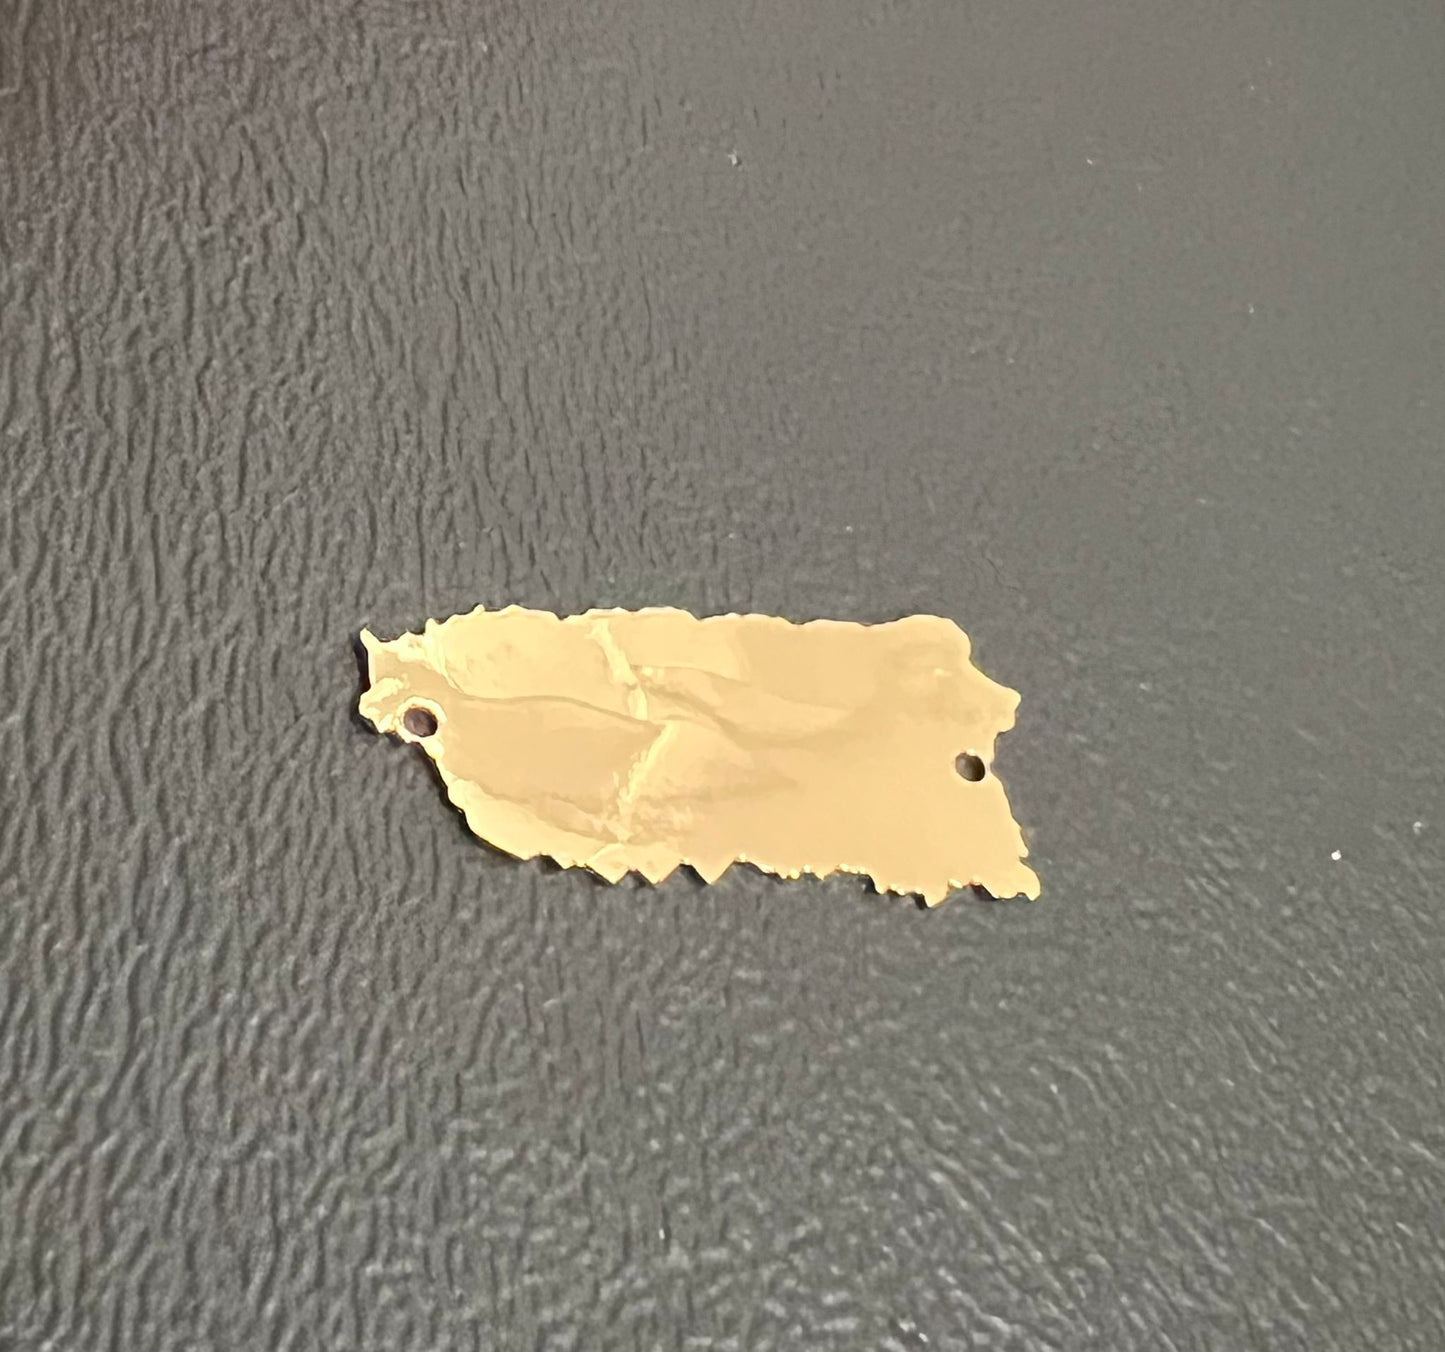 Puerto Rico map “gold plated”